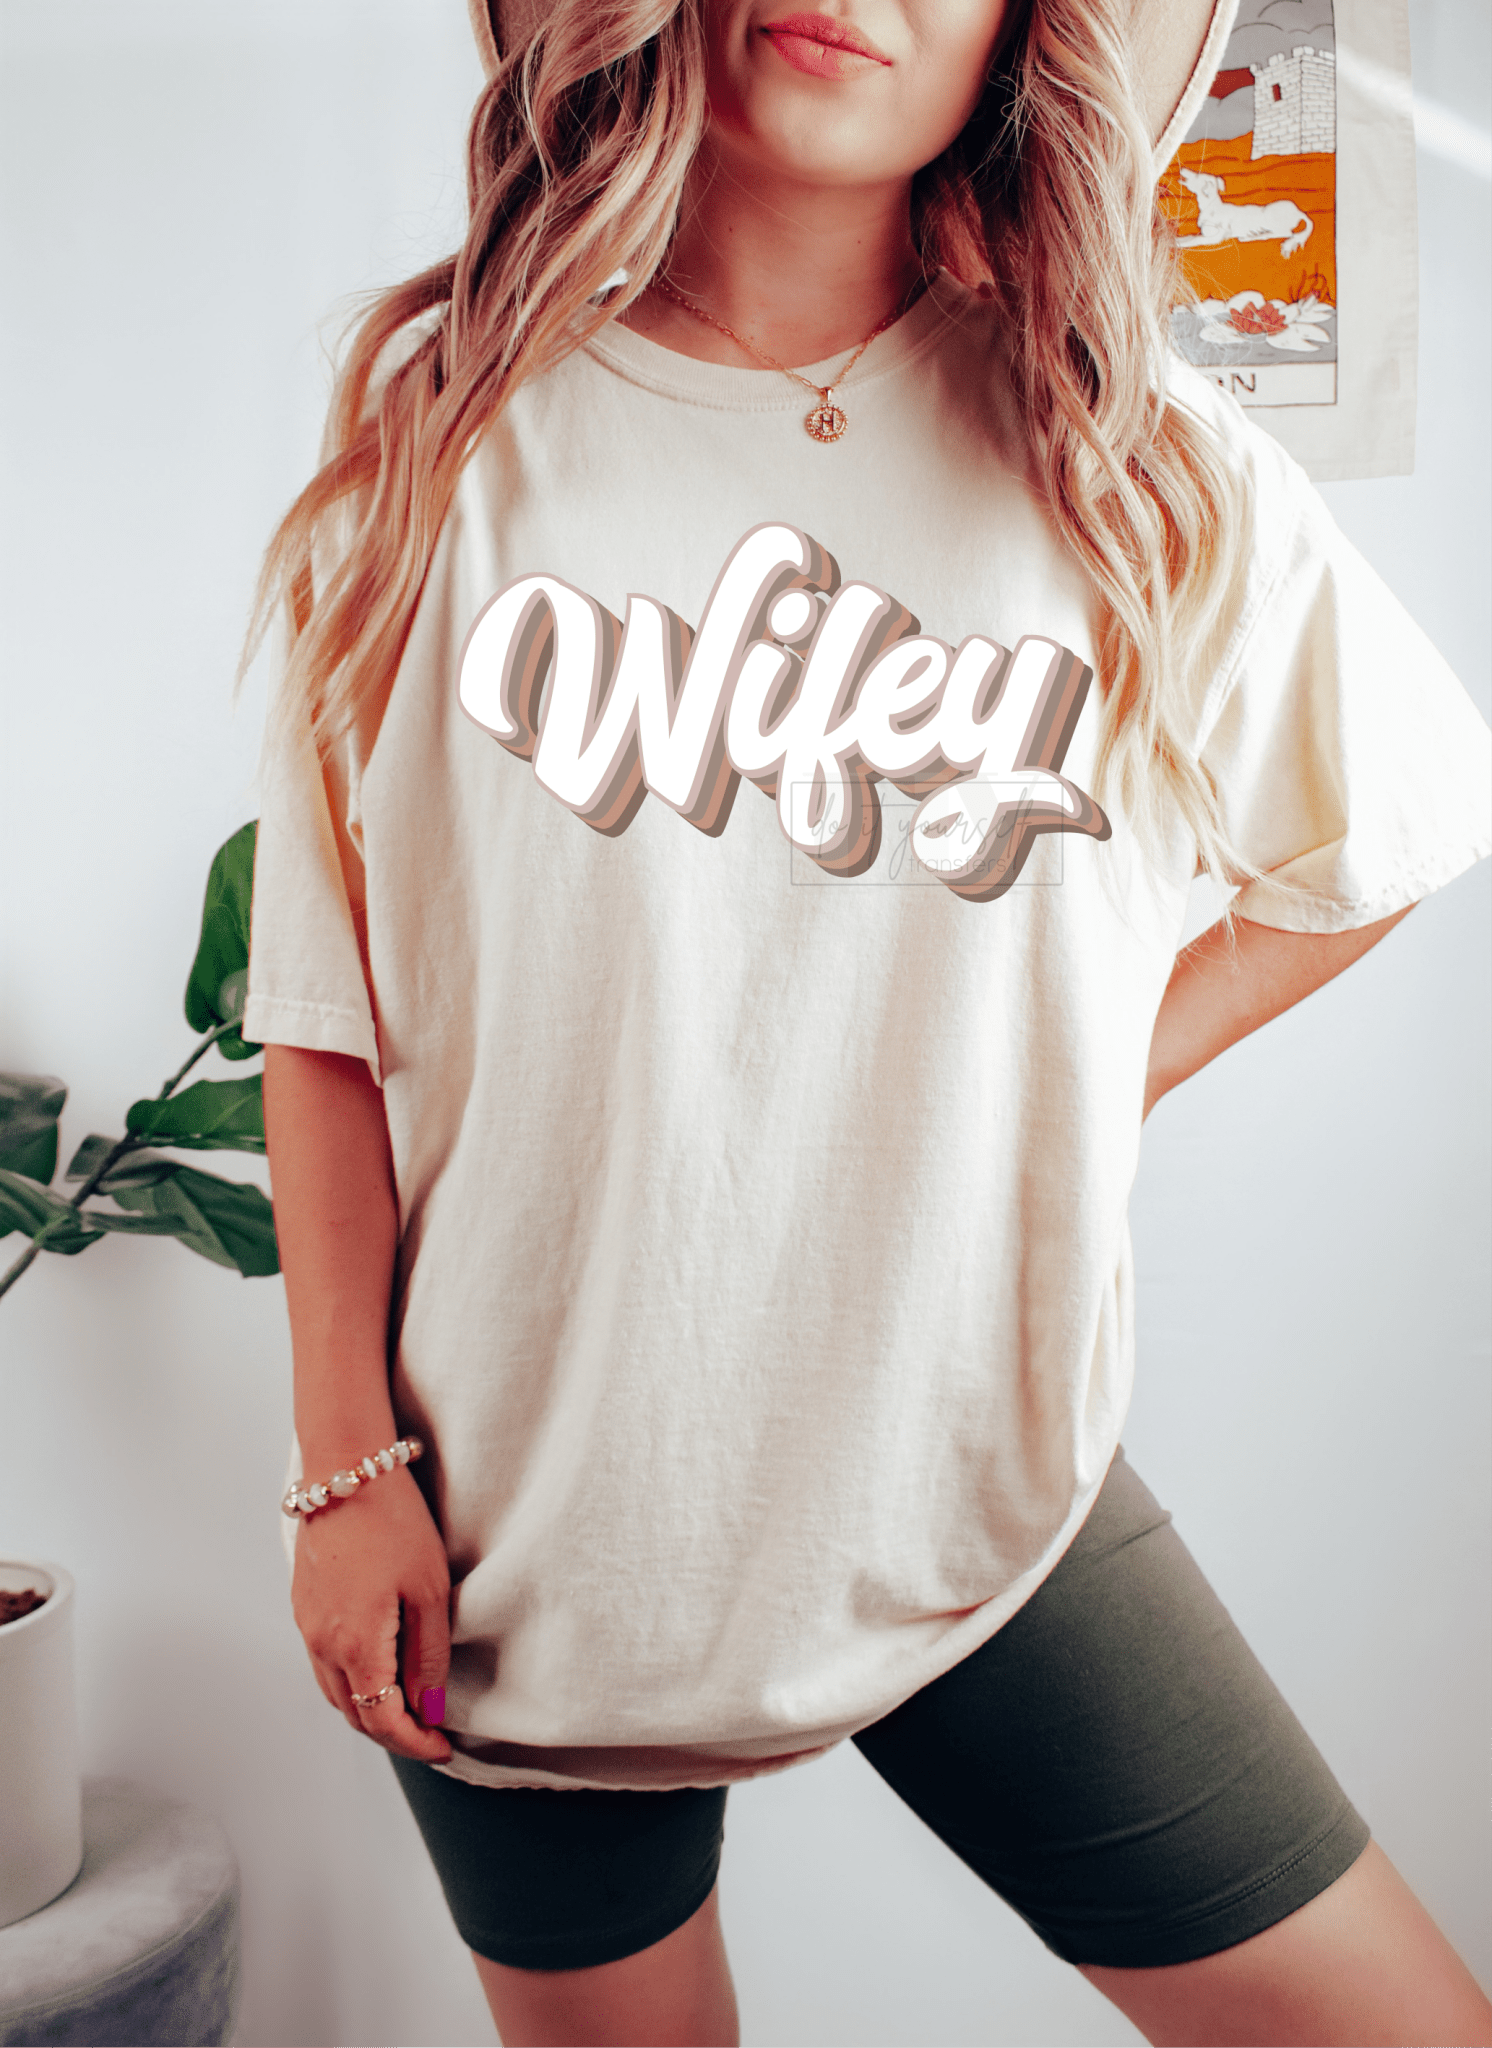 WIFEY Tan white size ADULT DTF TRANSFERPRINT TO ORDER - Do it yourself Transfers